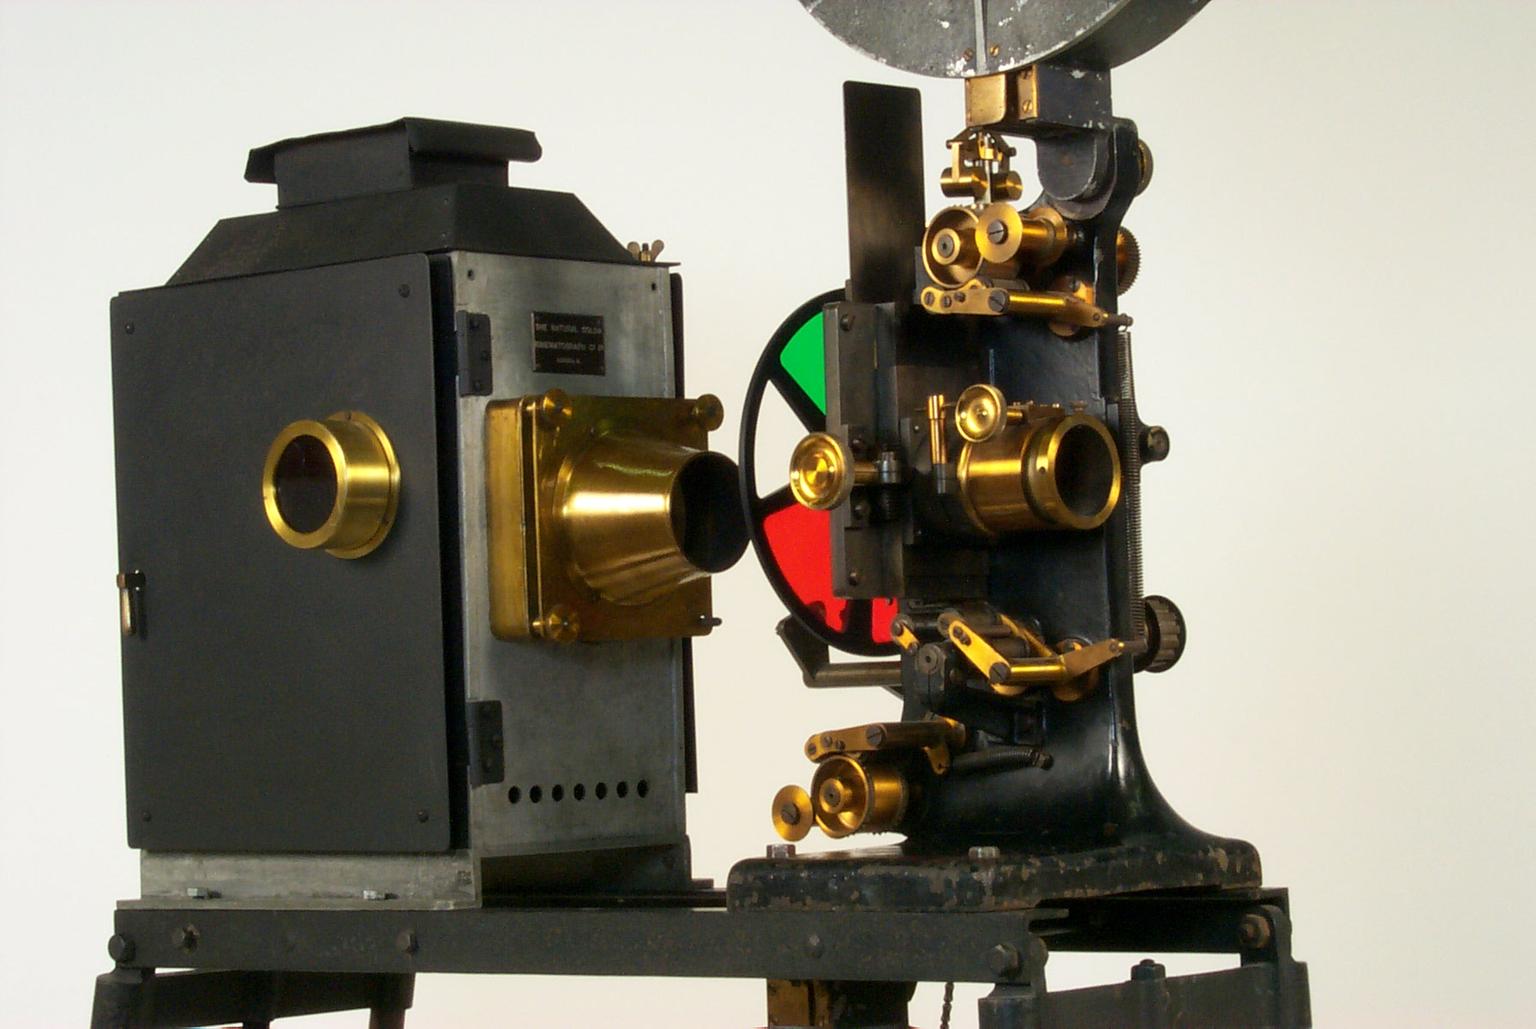 Kinemacolor 35mm projector, 1910